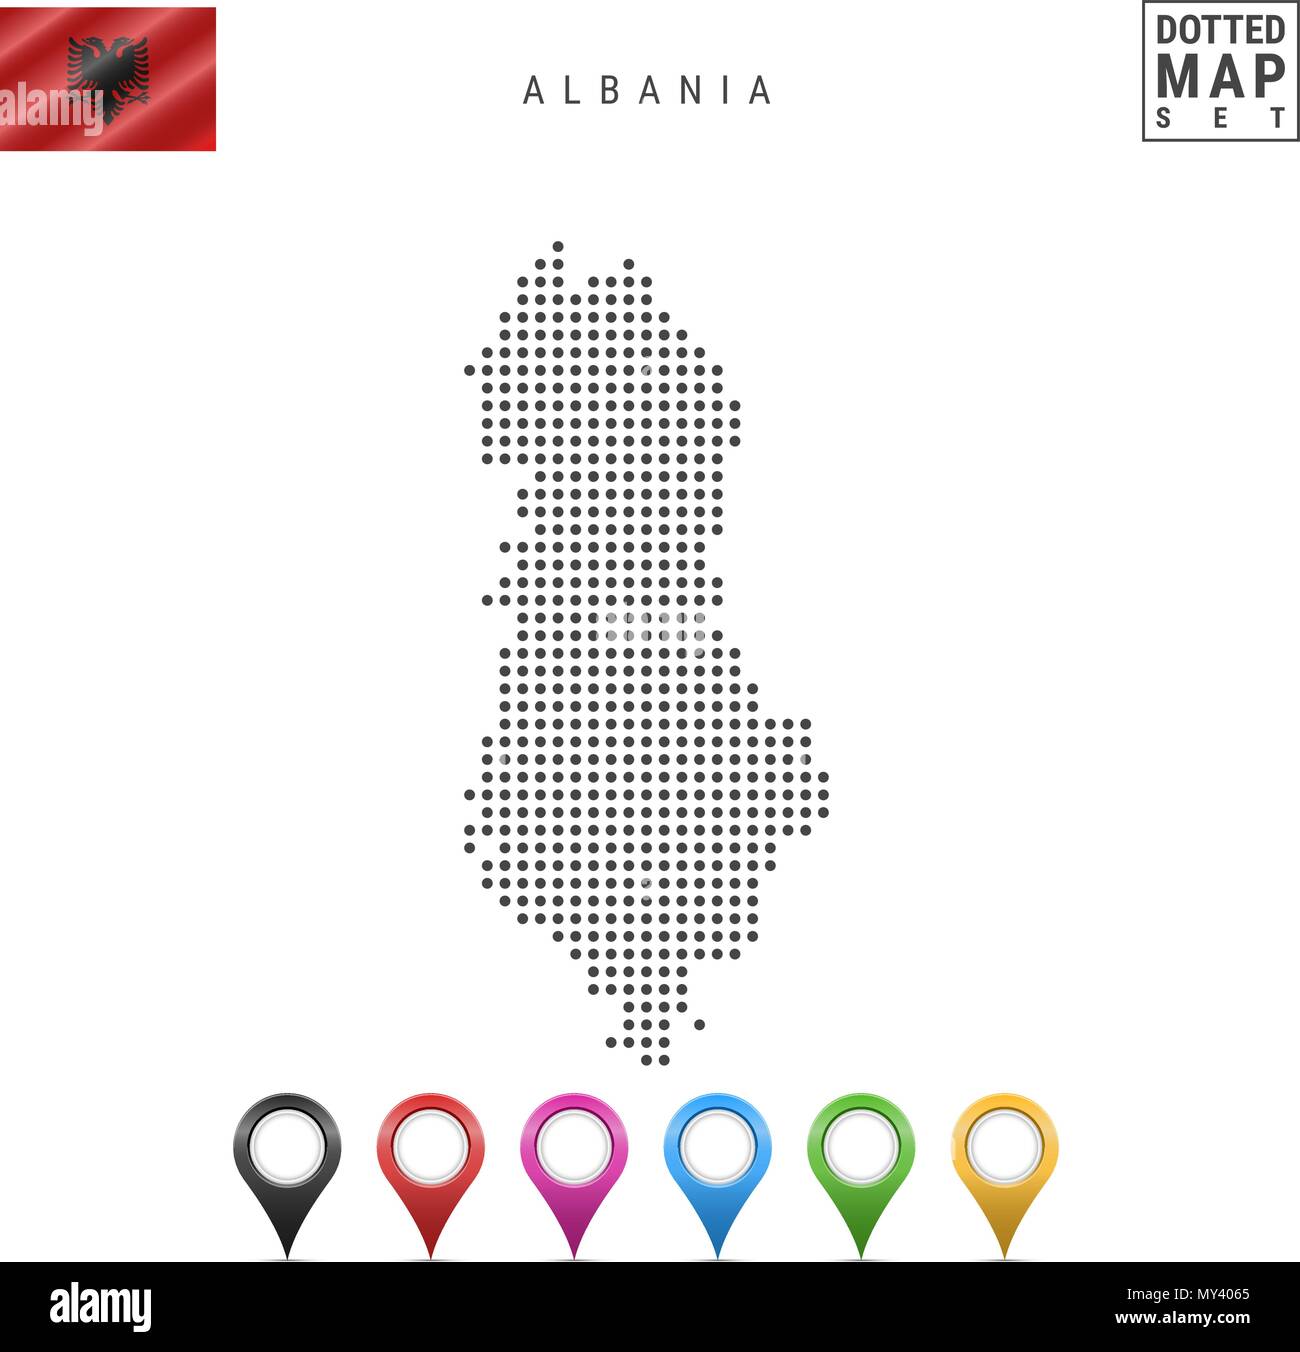 Vector Dotted Map of Albania. Simple Silhouette of Albania. National Flag of Albania. Set of Multicolored Map Markers Stock Vector